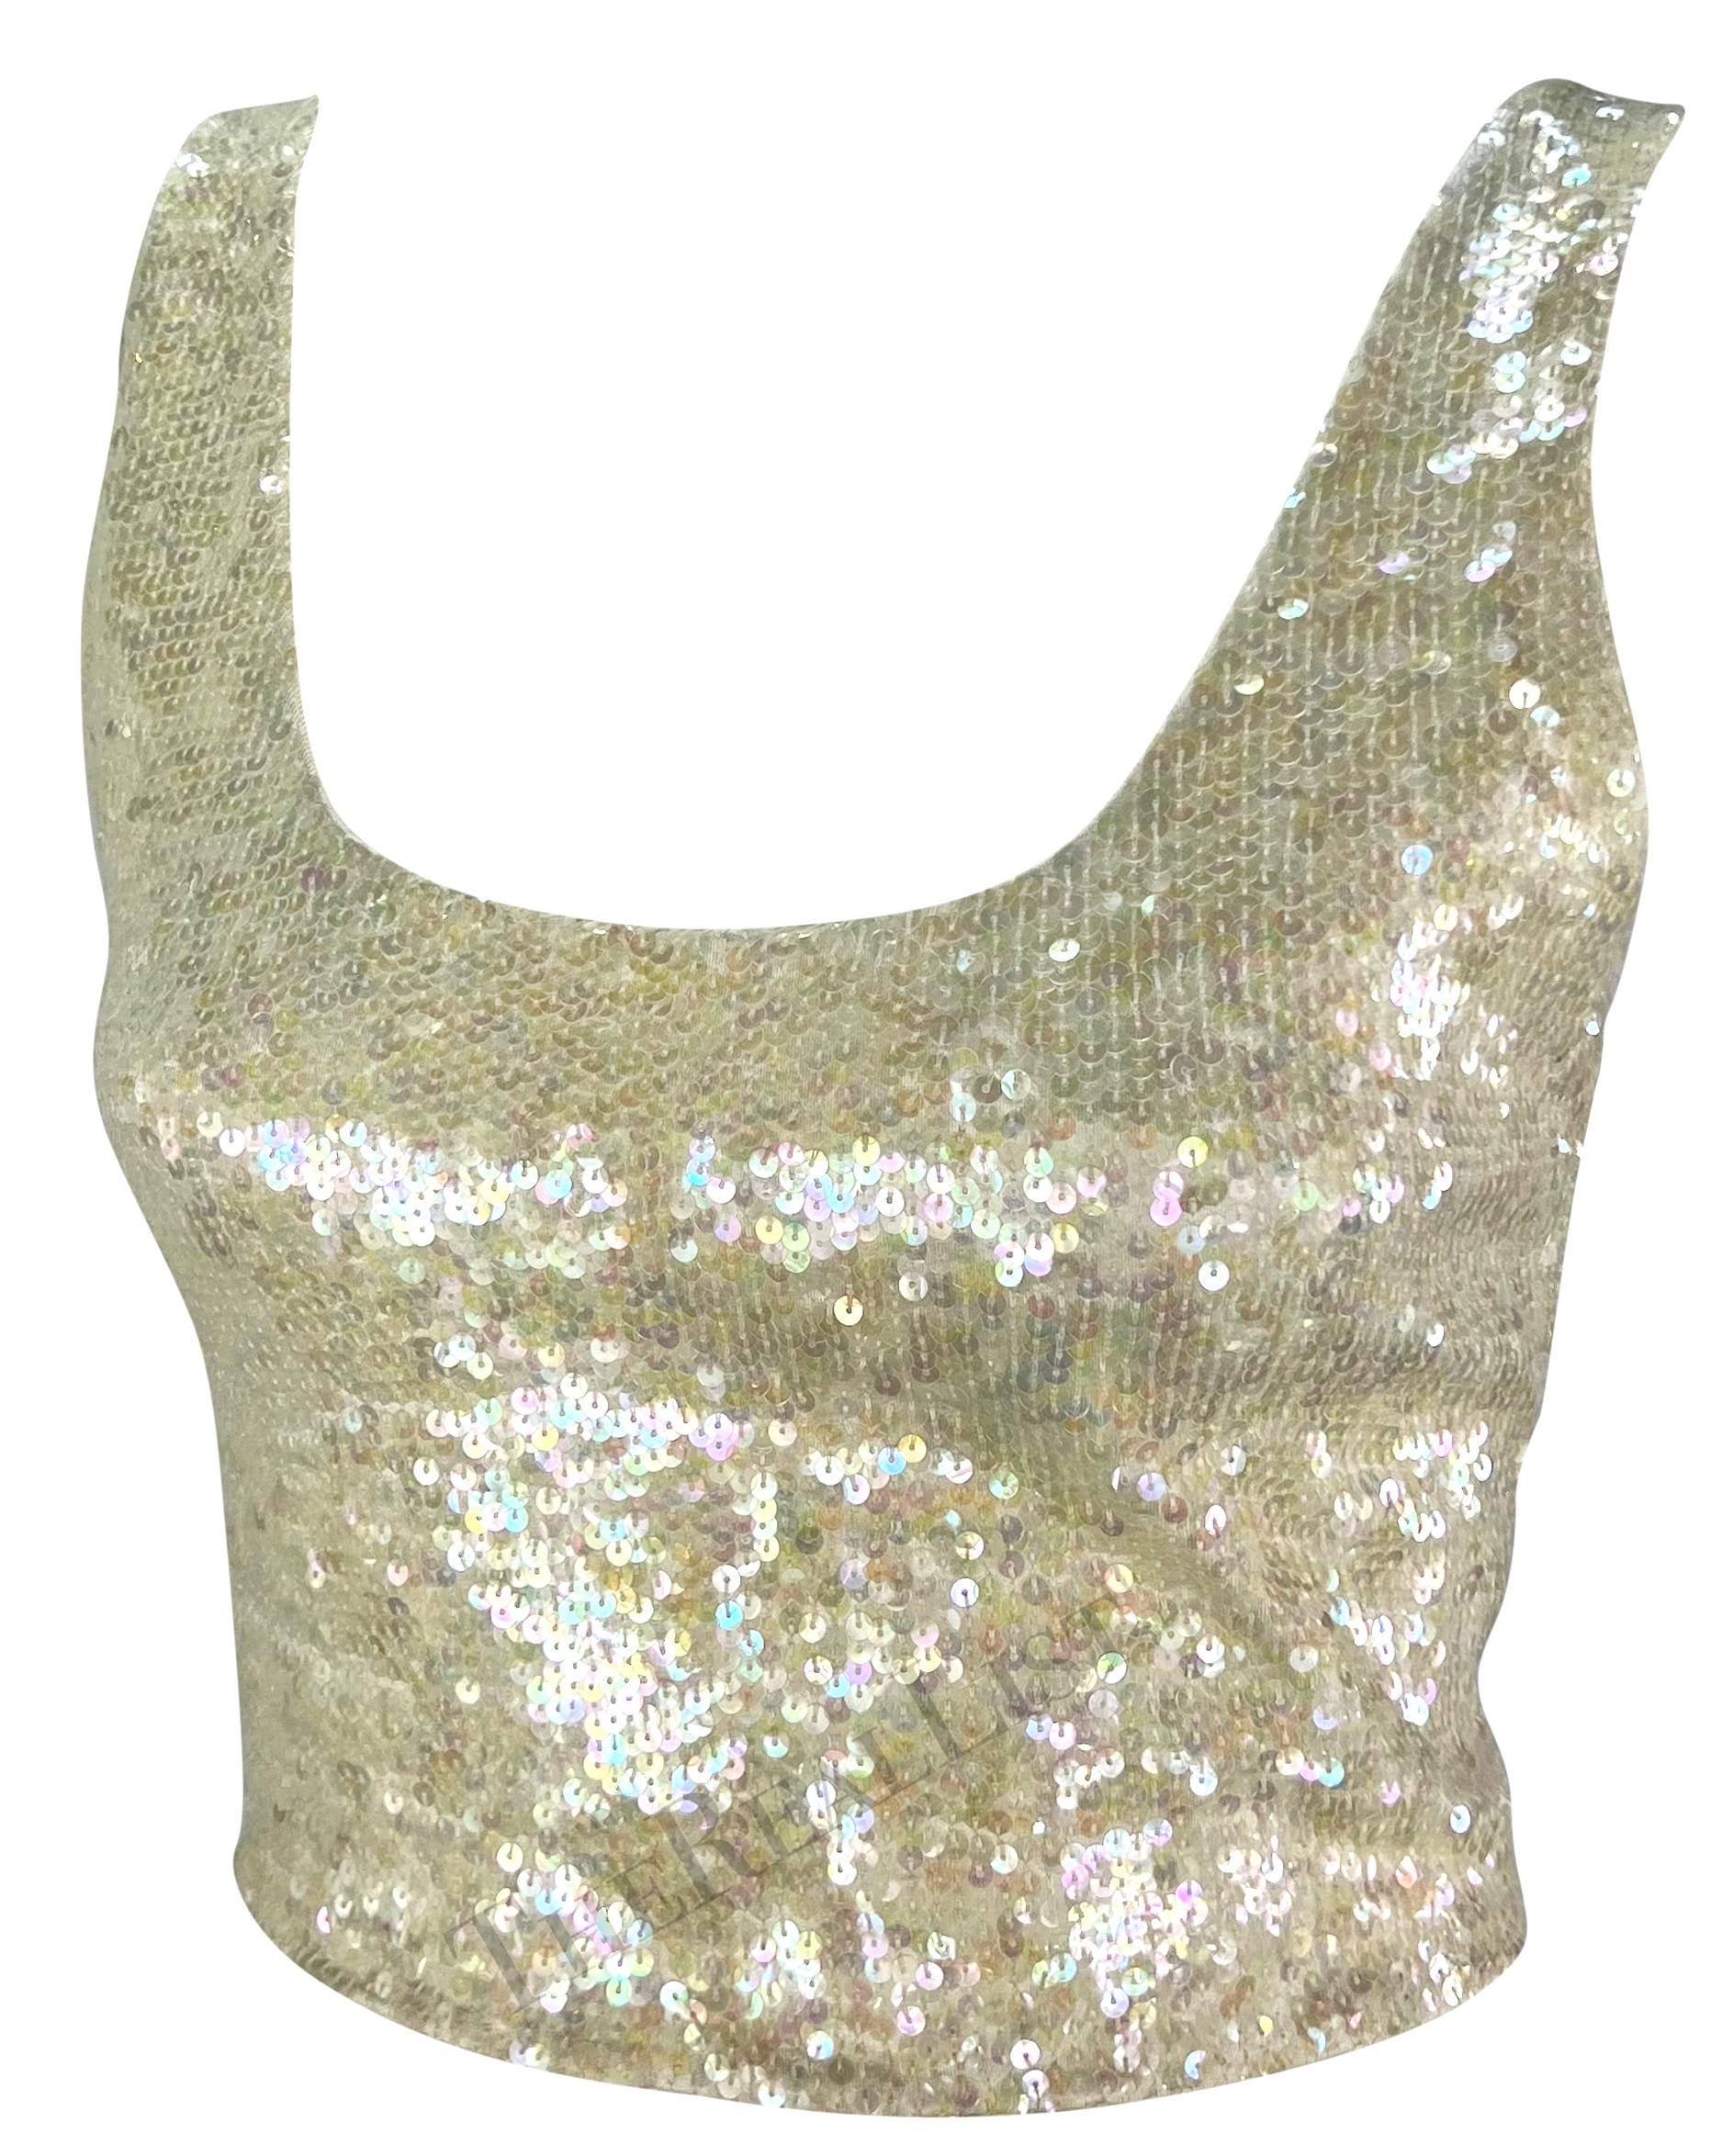 Presenting an exquisite off-white Ralph Lauren sequin crop tank top from the 1990s. This dazzling top features iridescent sequins, a scoop neckline, and a low scoop back, adding a touch of brilliance to its design. The perfect sparkly addition to